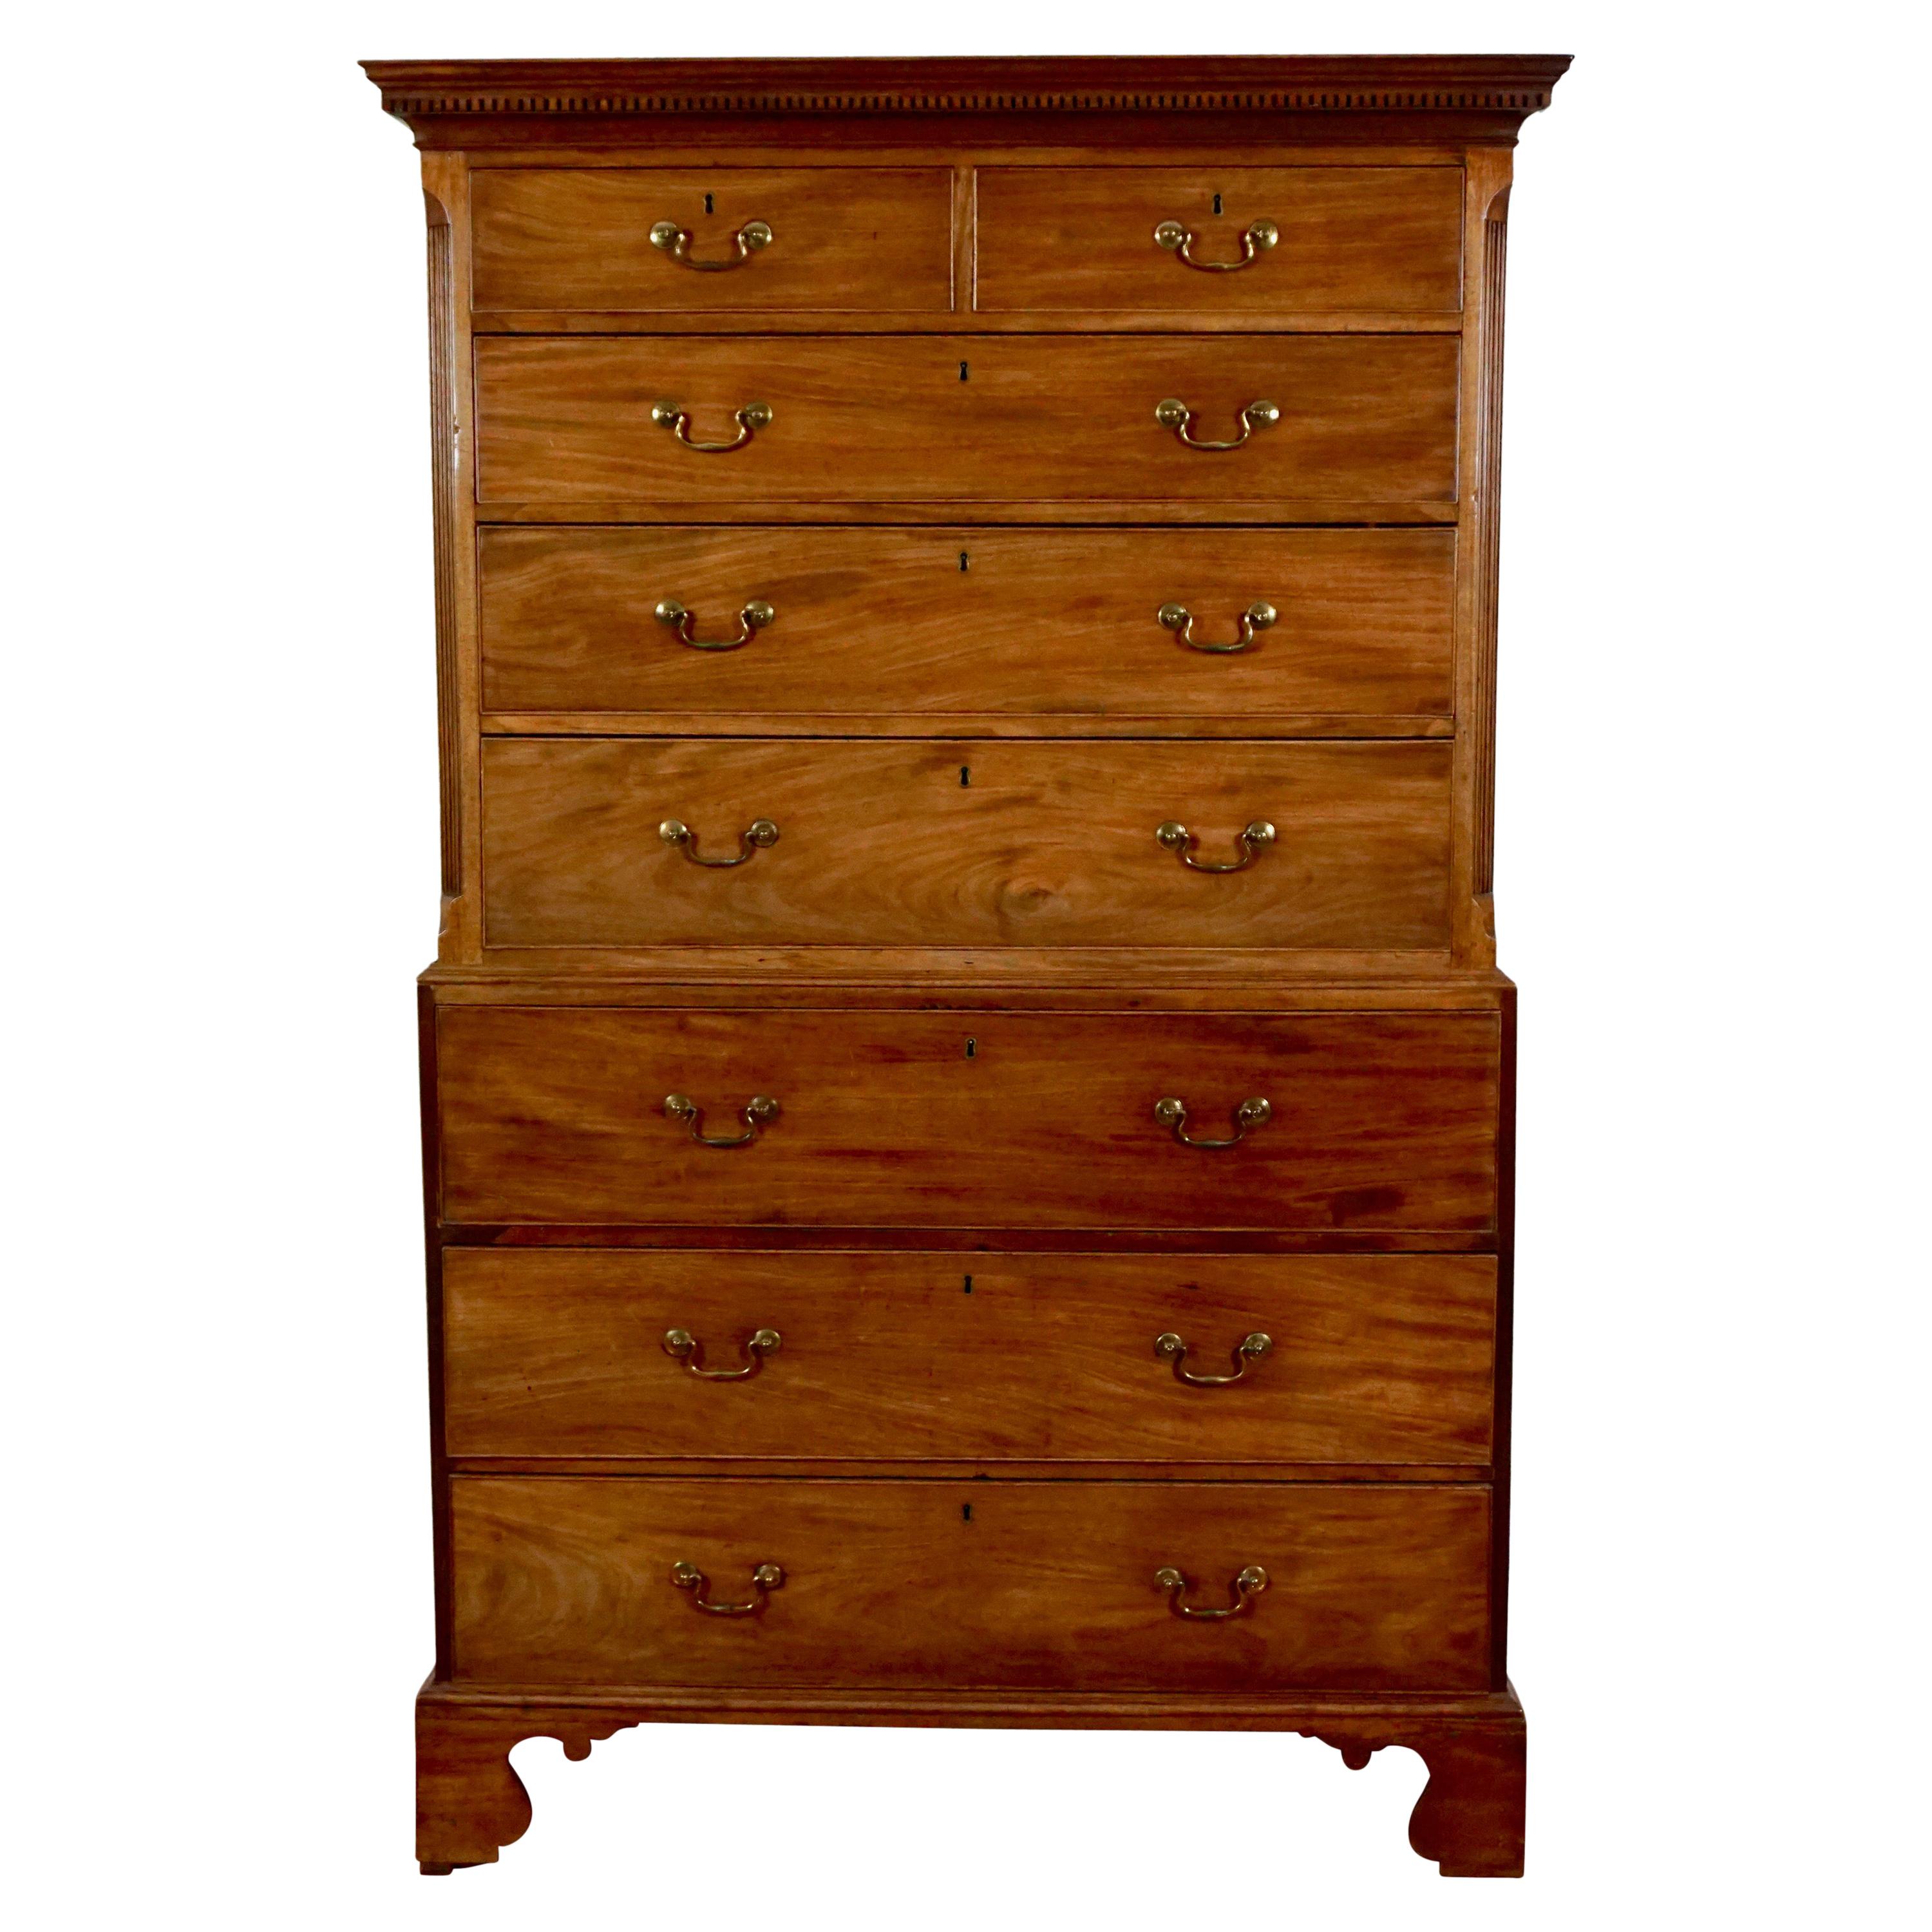 George III Chippendale Period Mahogany Chest-on-Chest with Secretaire